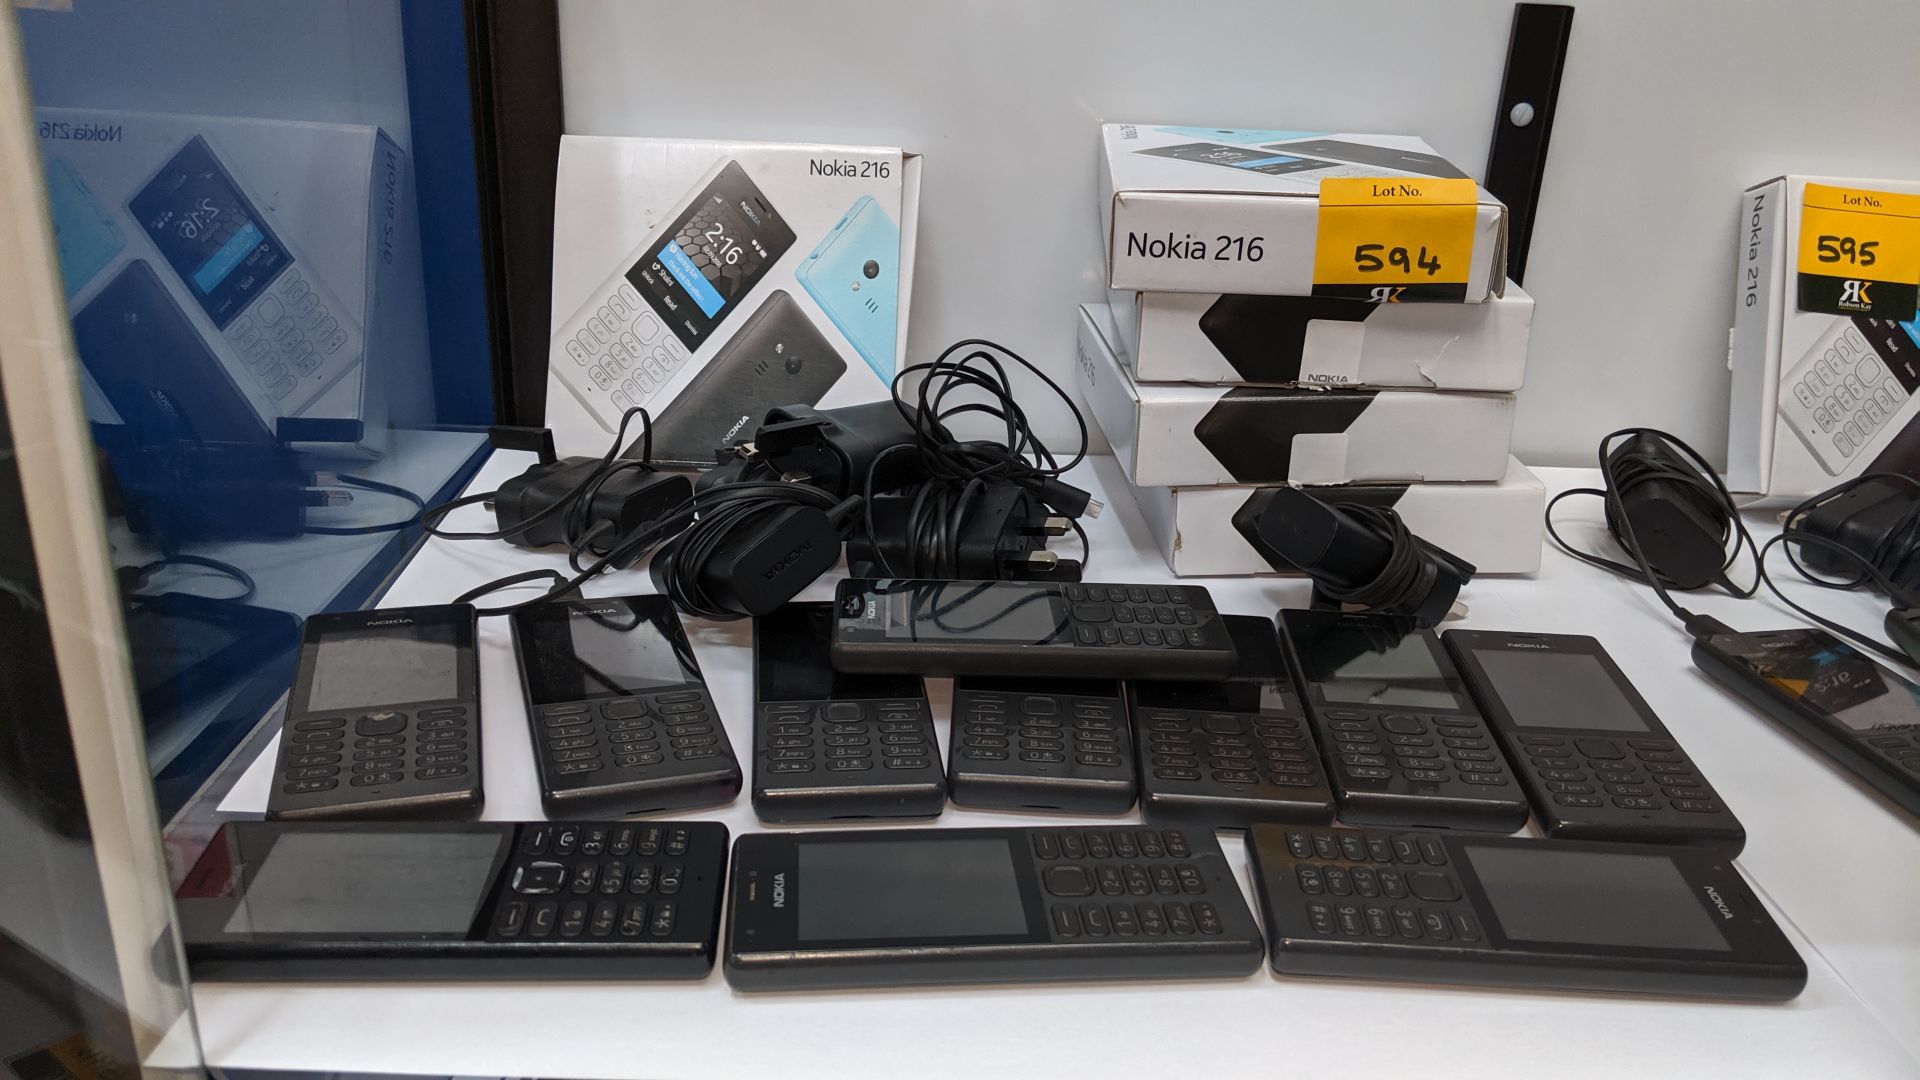 11 off Nokia 216 black mobile phones including 7 chargers & 5 boxes. We believe these phones were